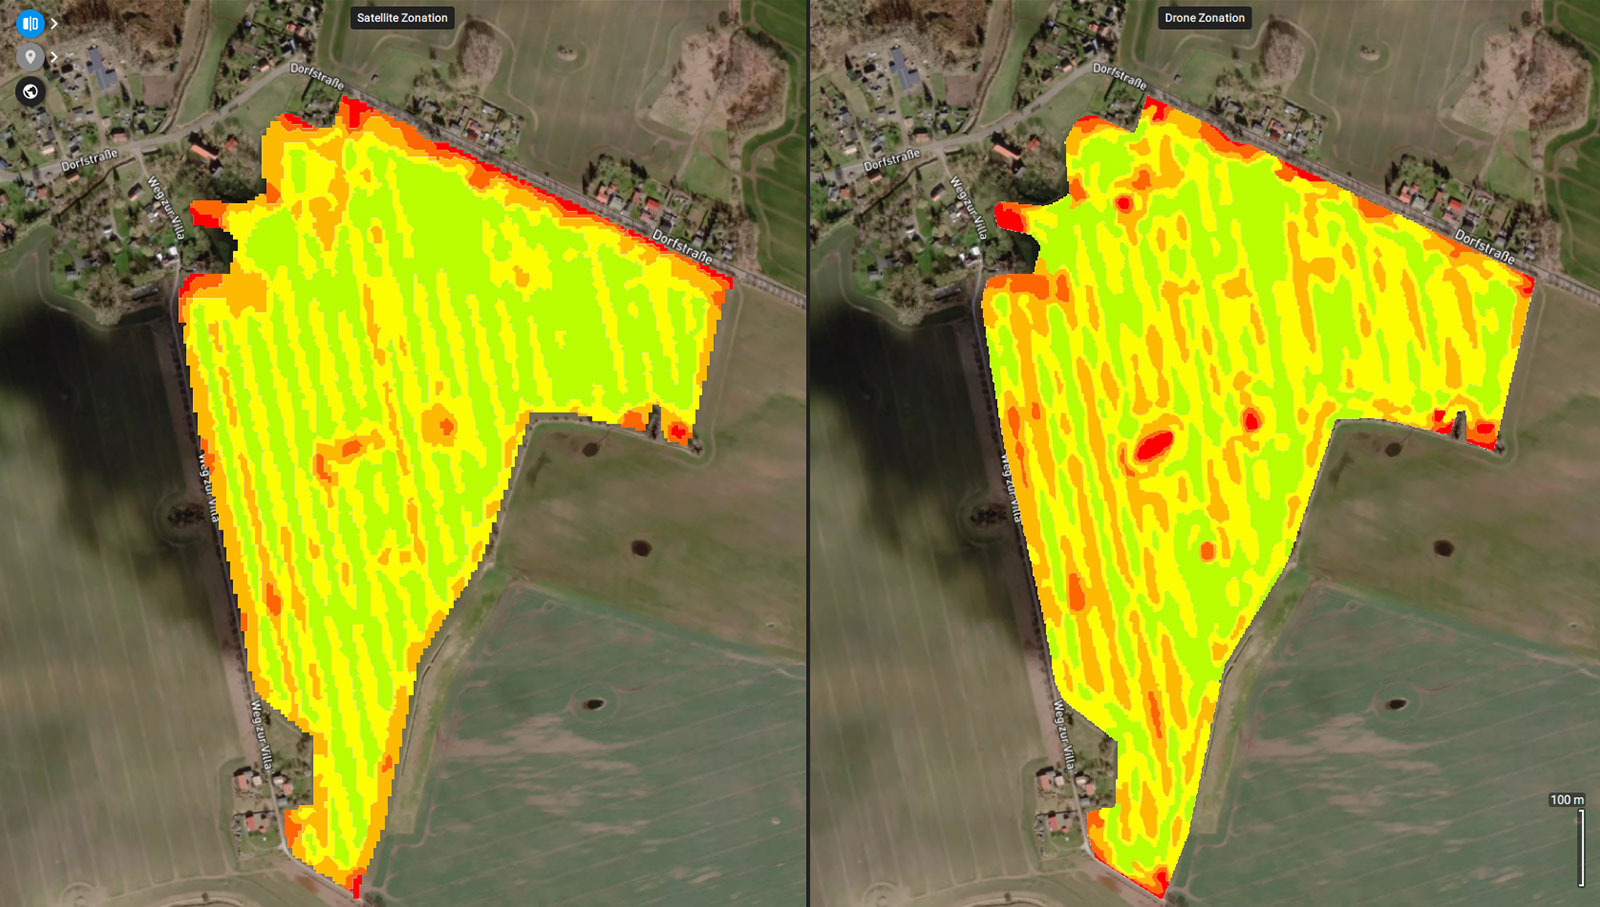 Left and right comparison images showing the satellite data import